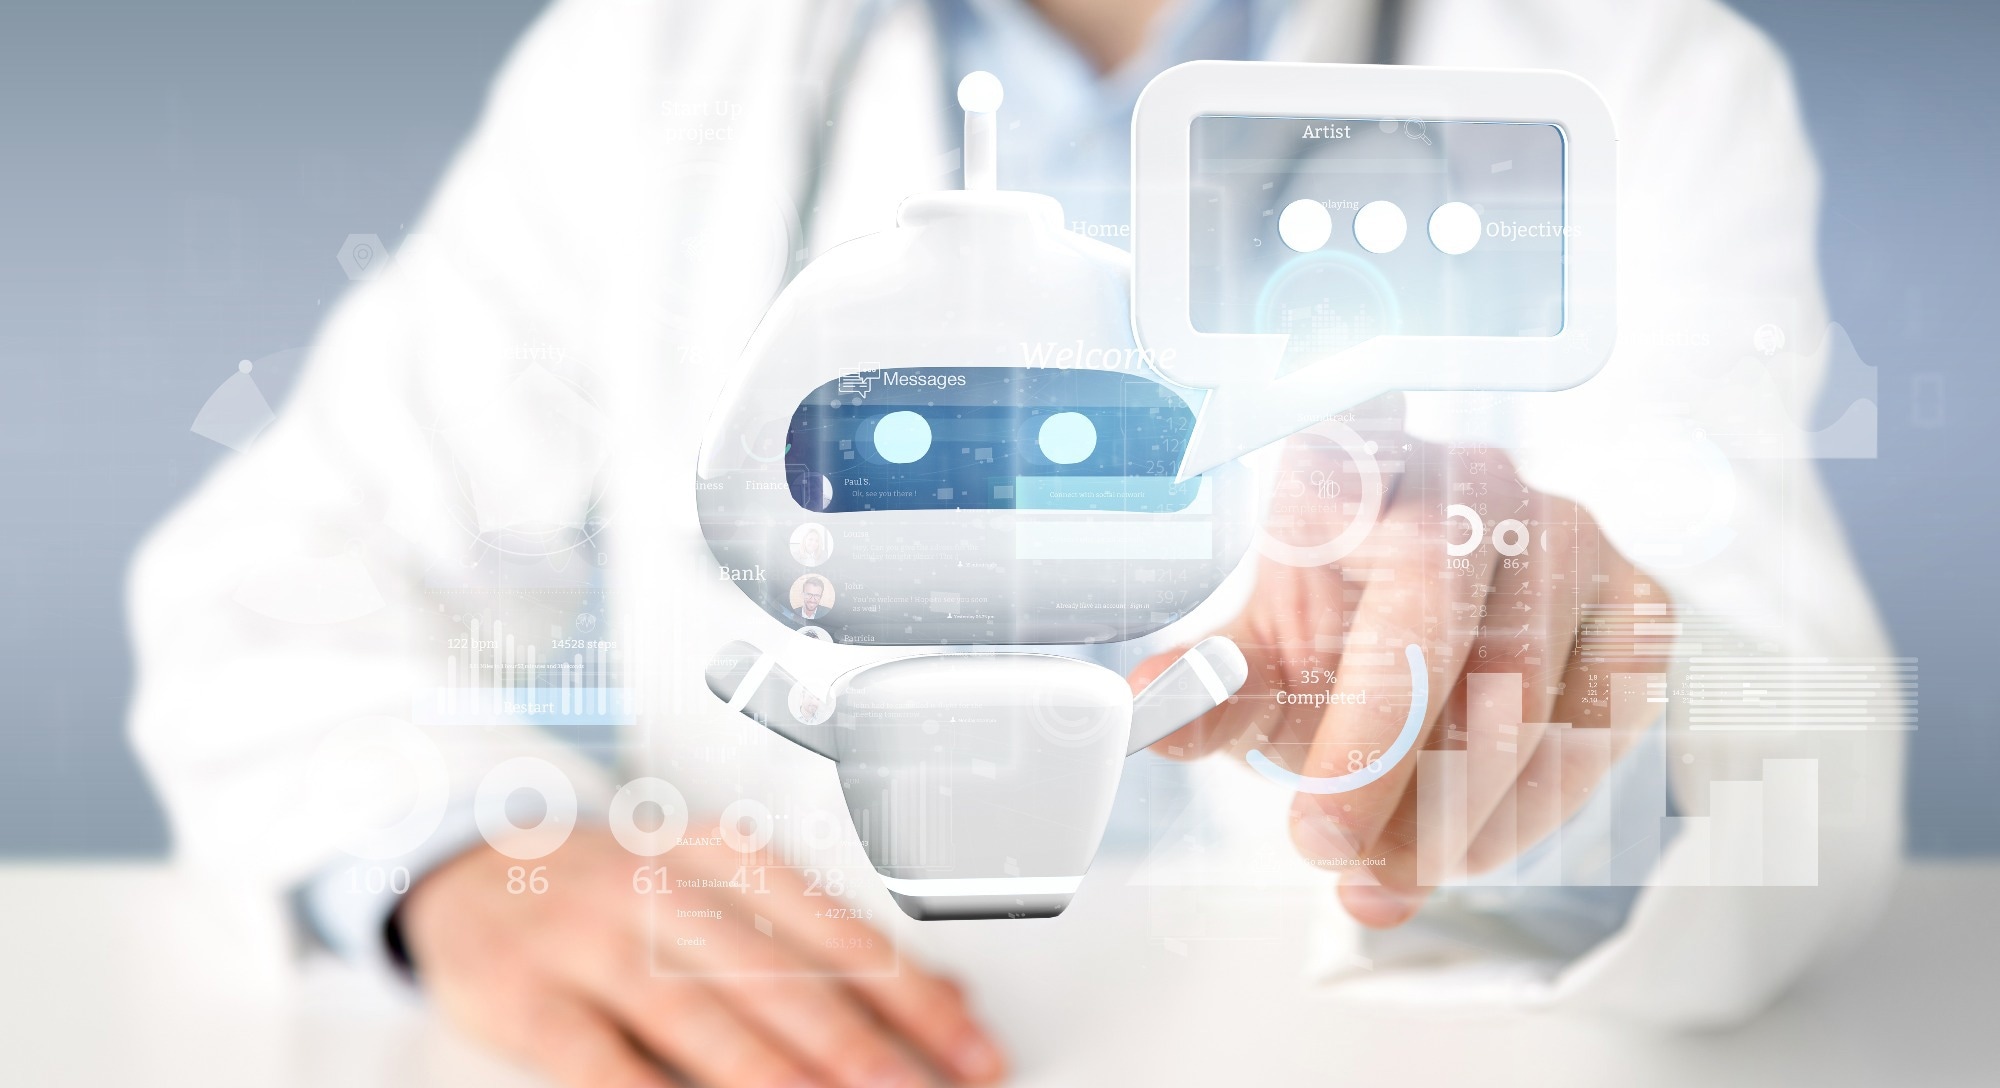 Study: A User-Centric Approach to Evaluate Healthcare Chatbots. Image credit: Production Perig/Shutterstock